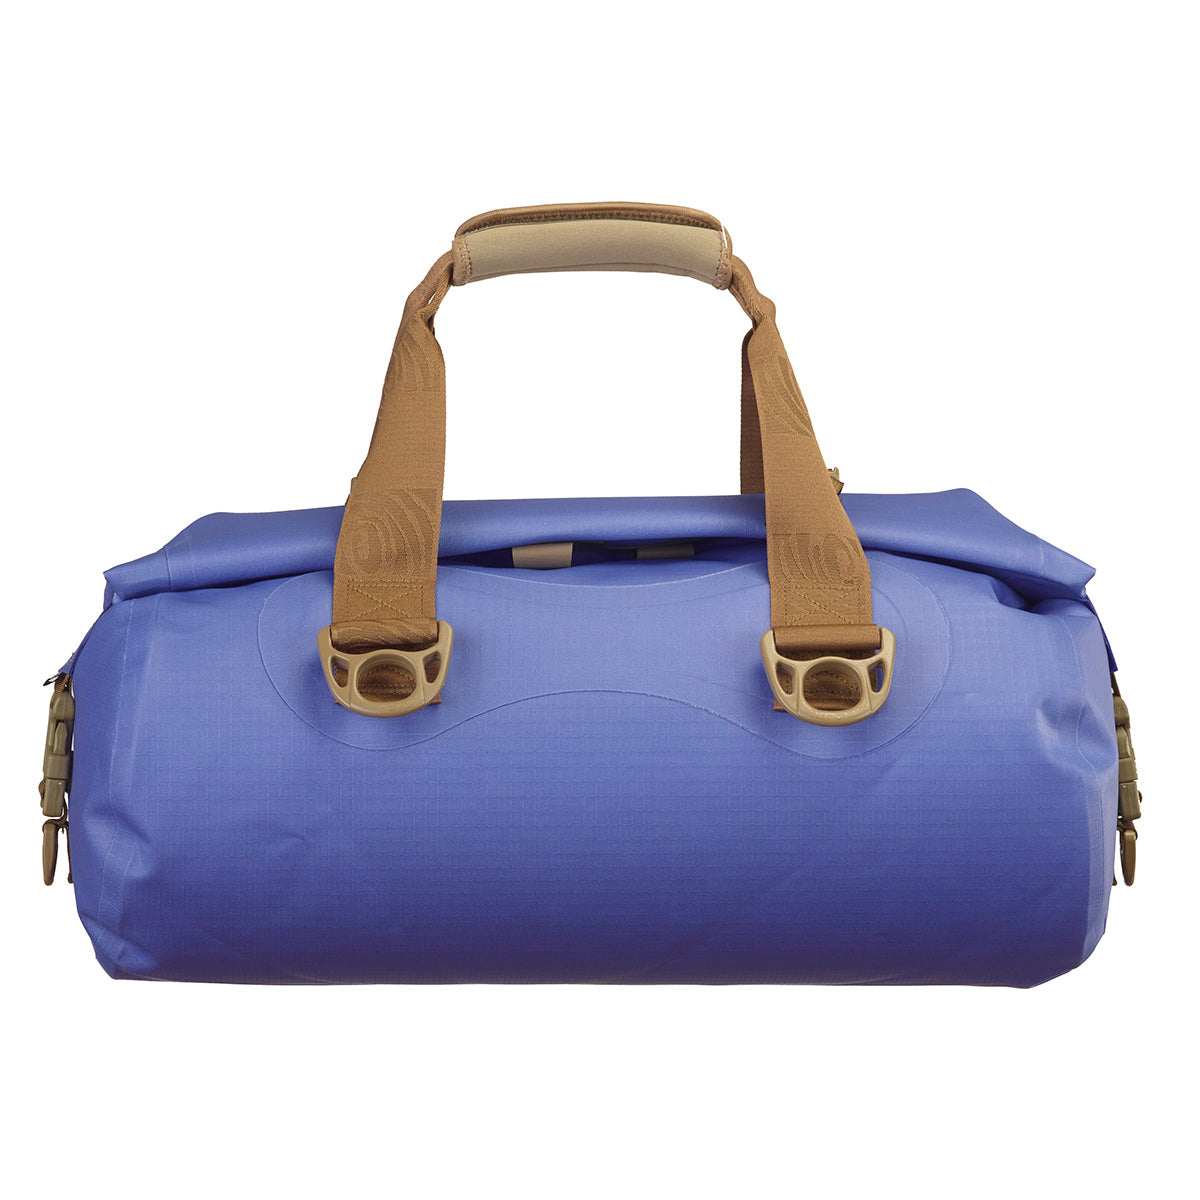 Watershed Chattooga Dry Duffle